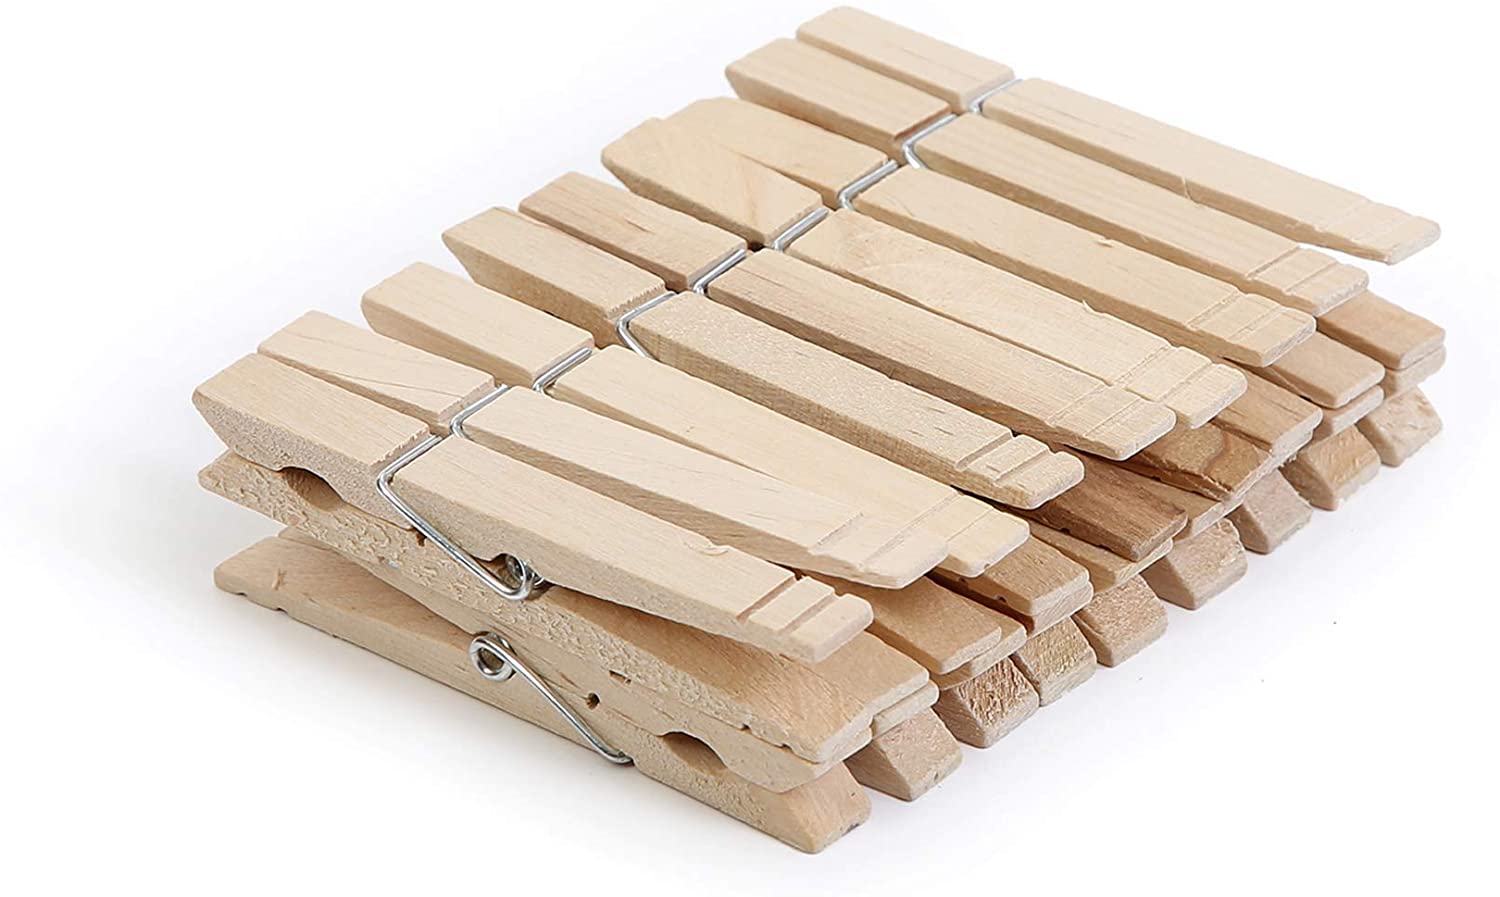 Pro-mart Heavy Duty 4 Coil Wooden Clothespins (18 Pack)